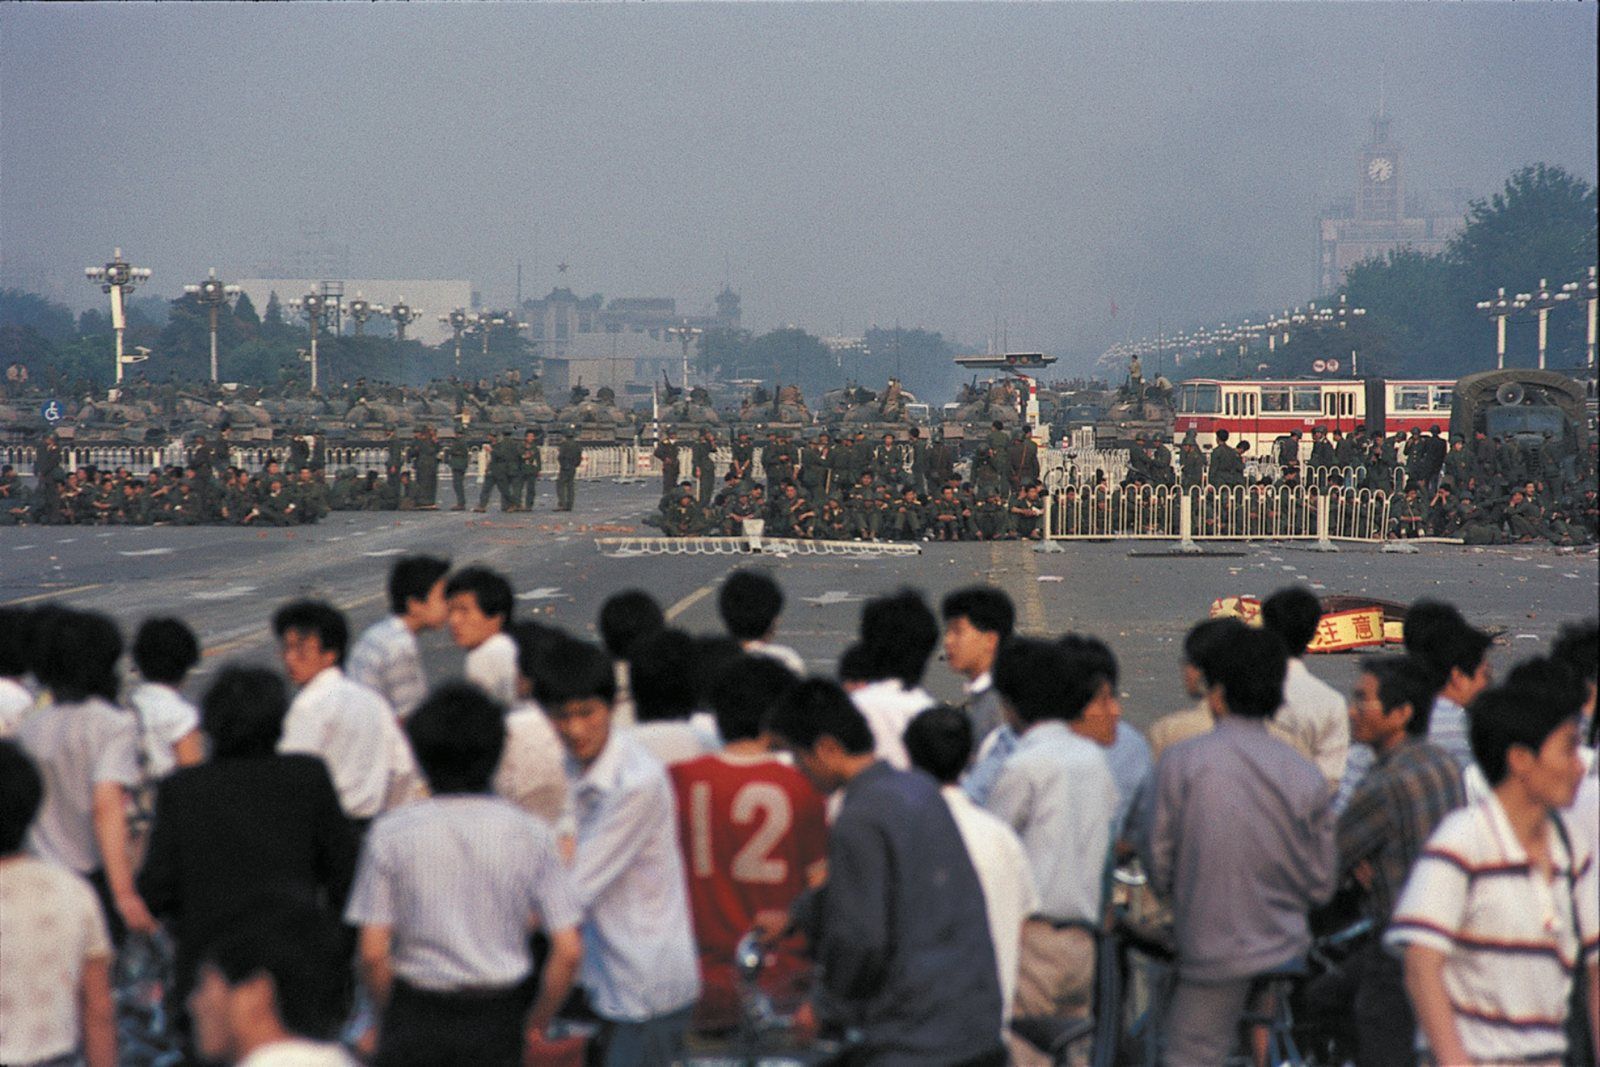 Demonstrators and troops during the Tiananmen Square protests. Image by Kao Bian. Beijing, 1989.